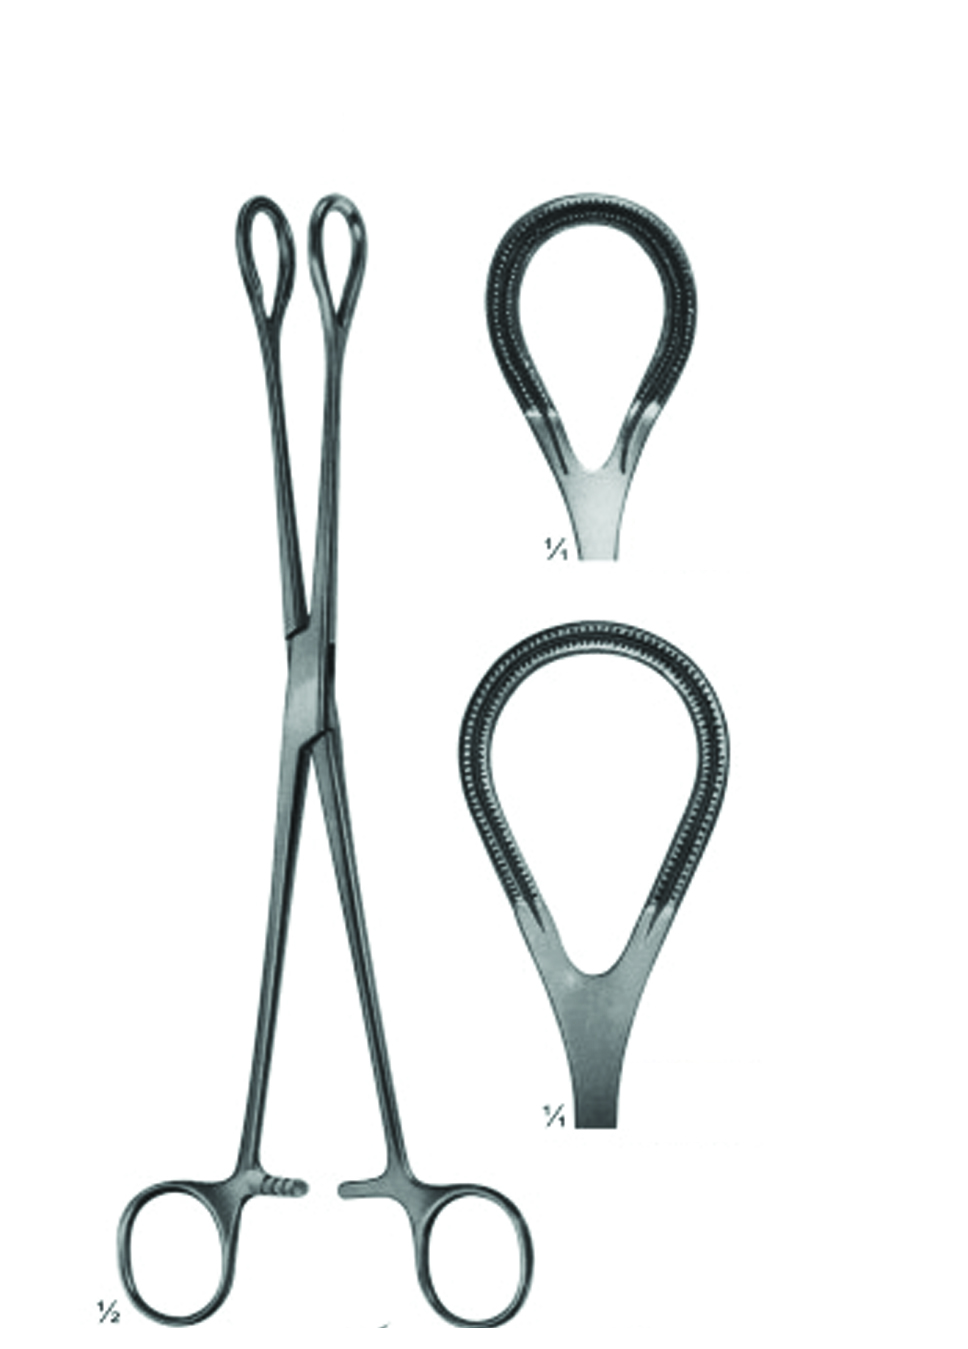 Gall Bladder Forceps and Gall Duct Scissors